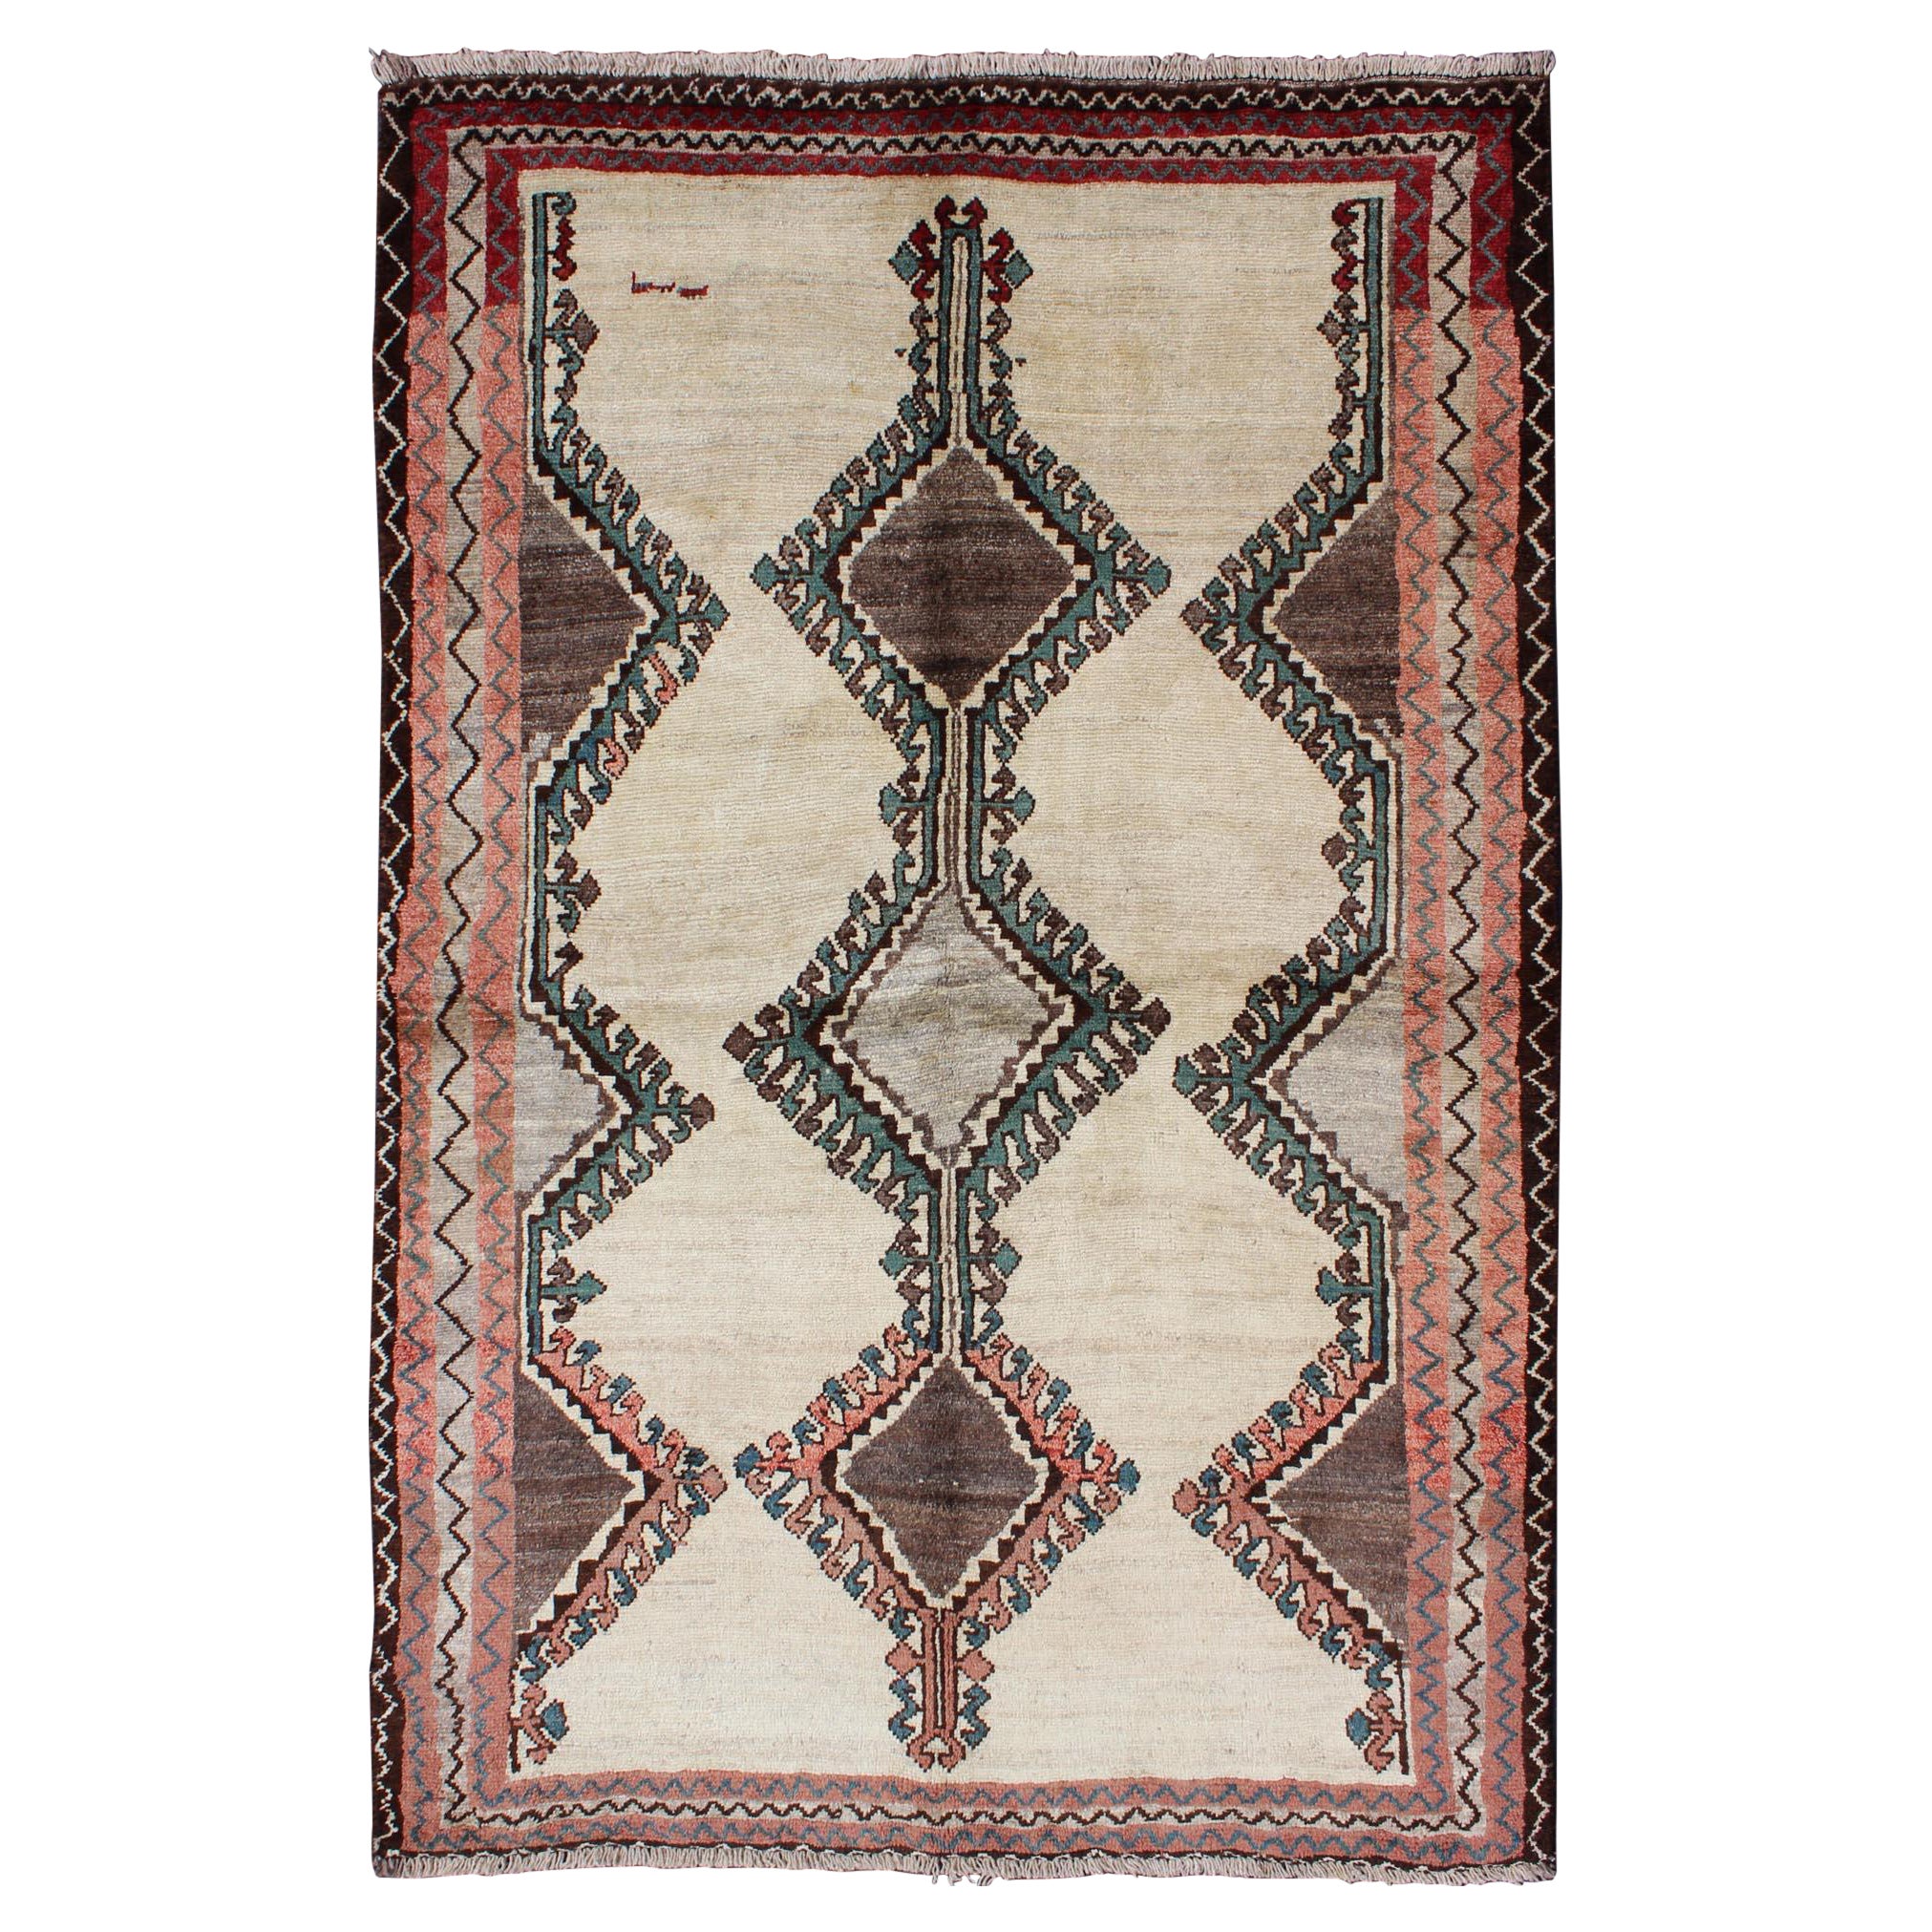 Vintage Persian Gabbeh Vintage Rug with Tribal Design in Cream, Red, and Green